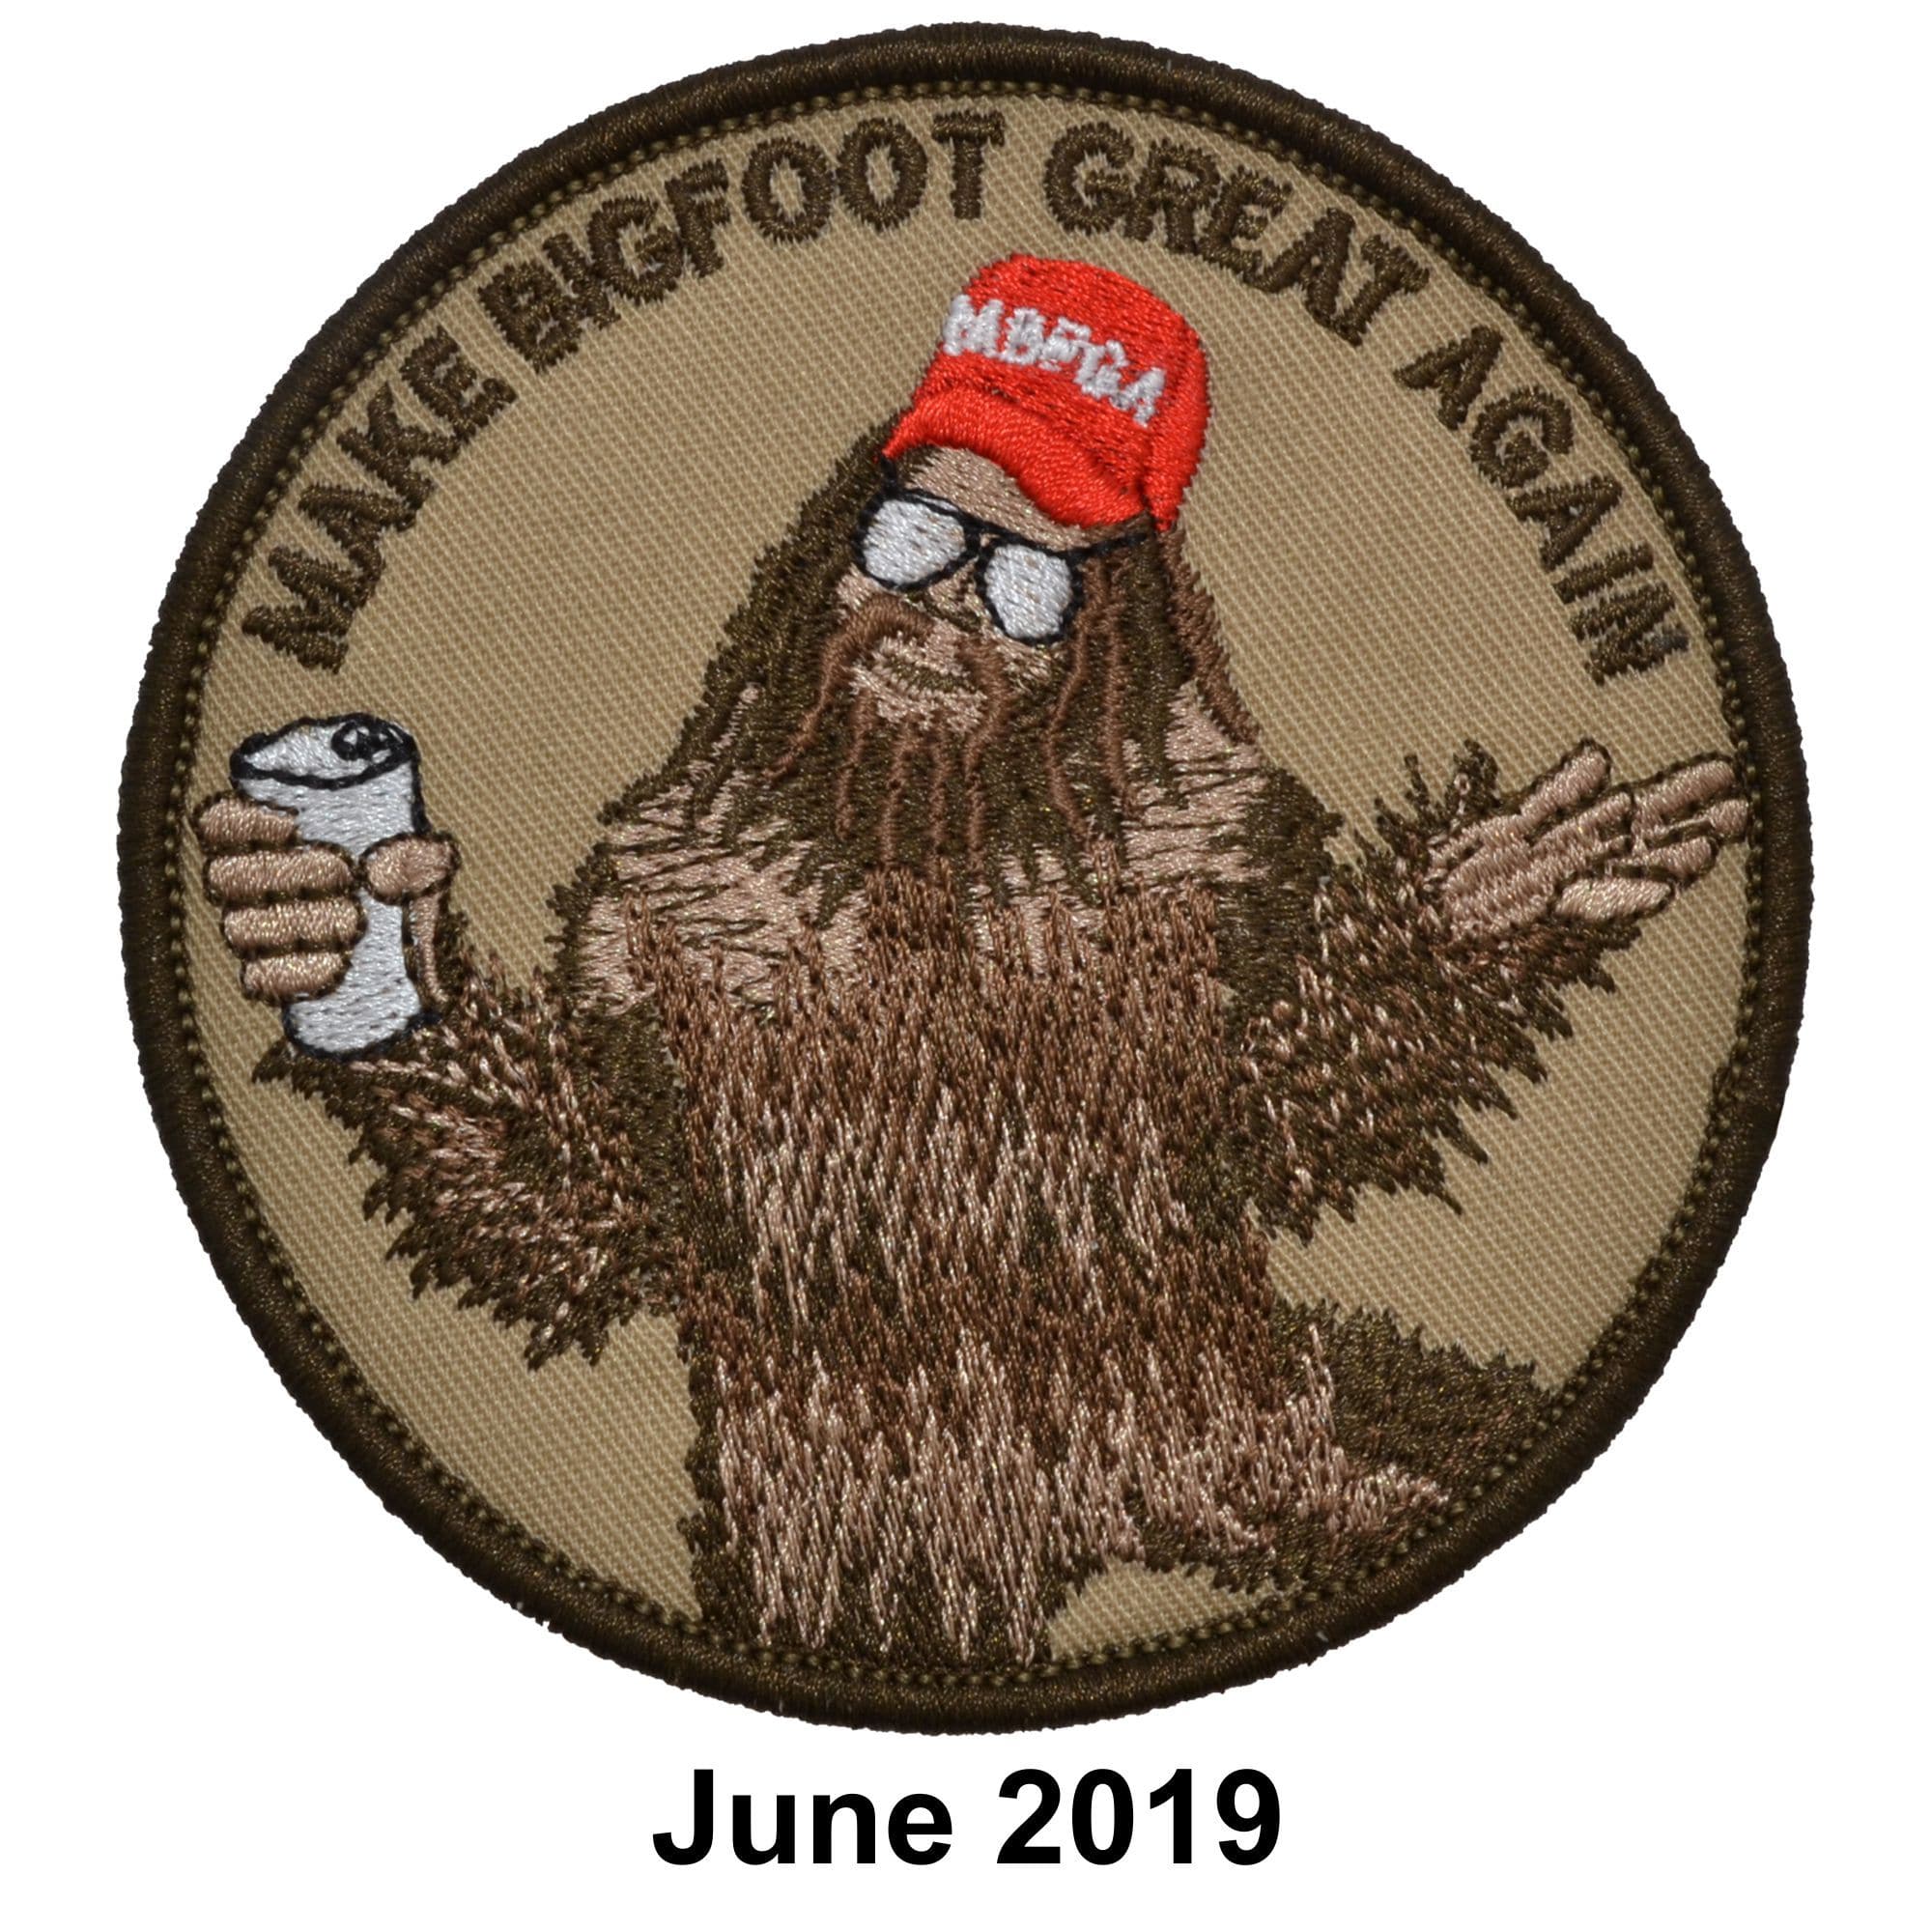 June 2019 Patch of the Month - Make Bigfoot Great Again